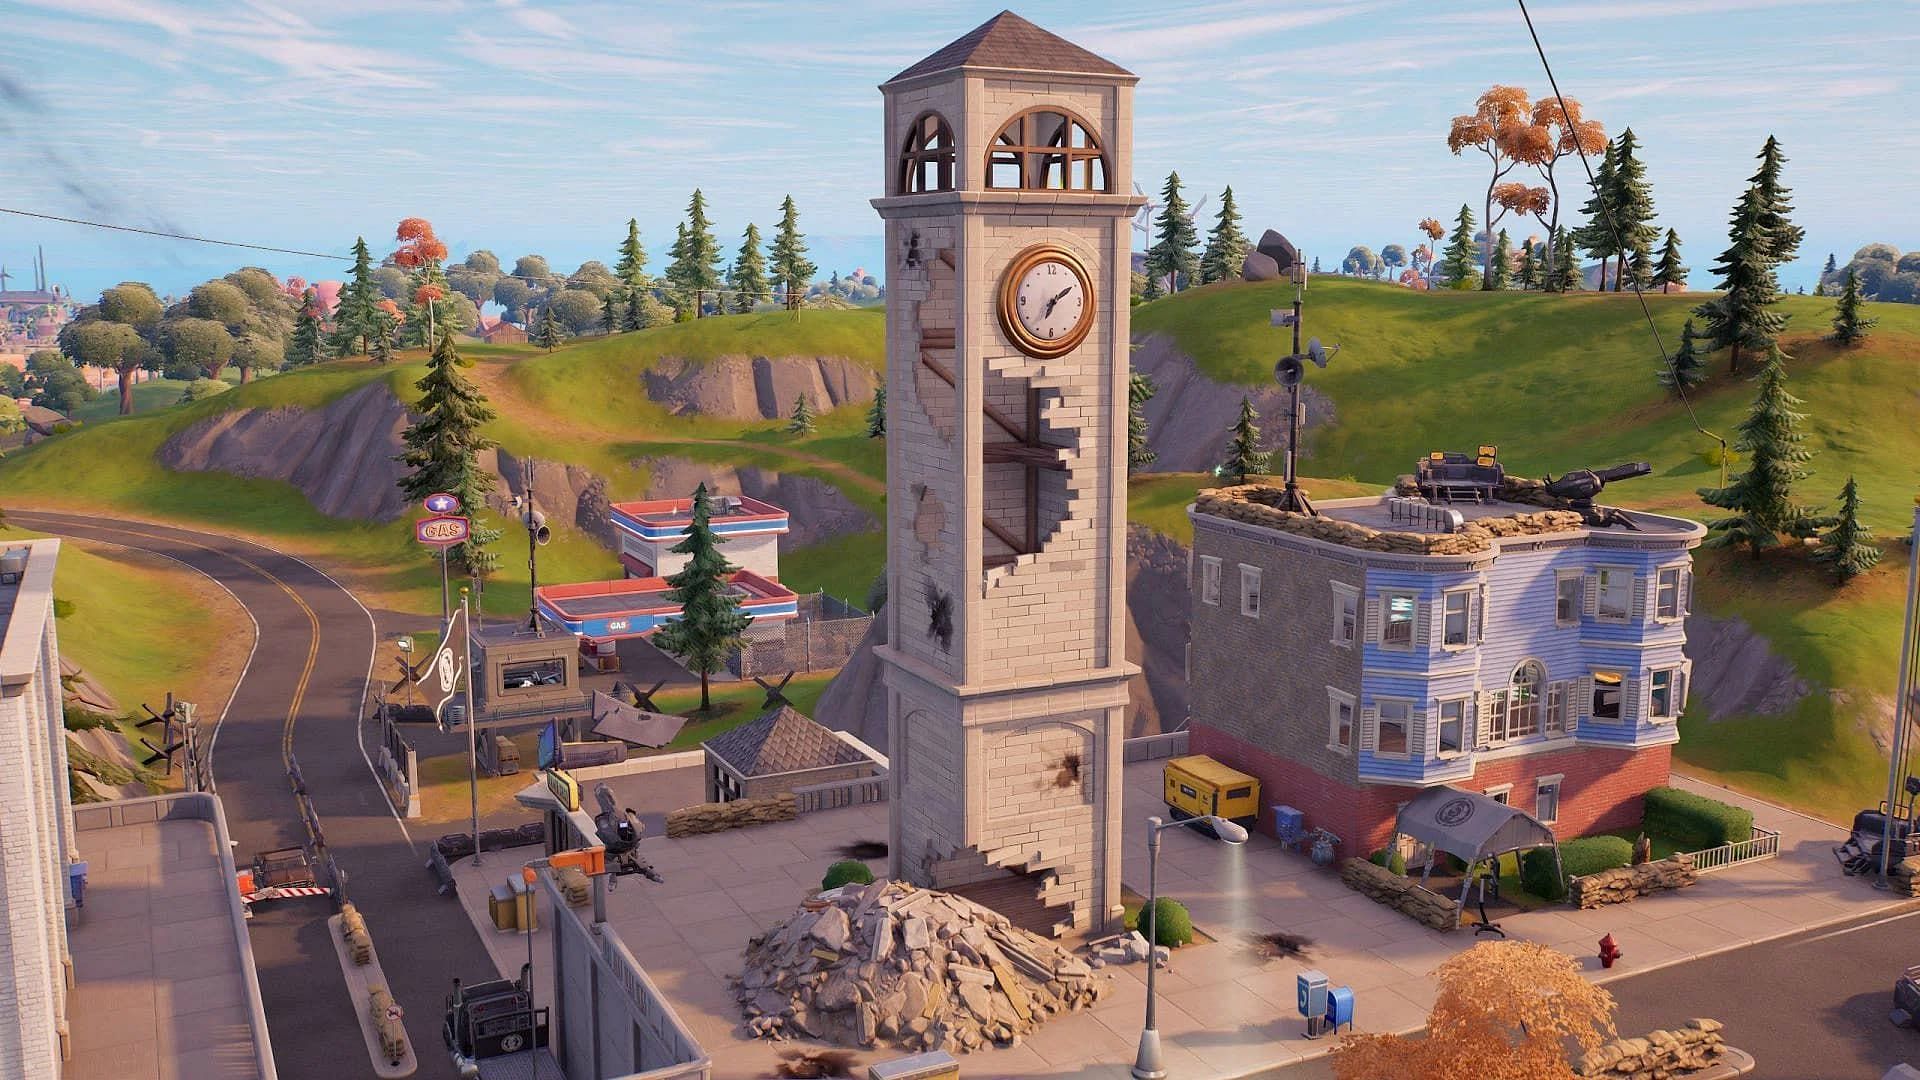 This is how Tilted Towers used to look during Chapter 3 Season 2. (Image by Sportskeeda)